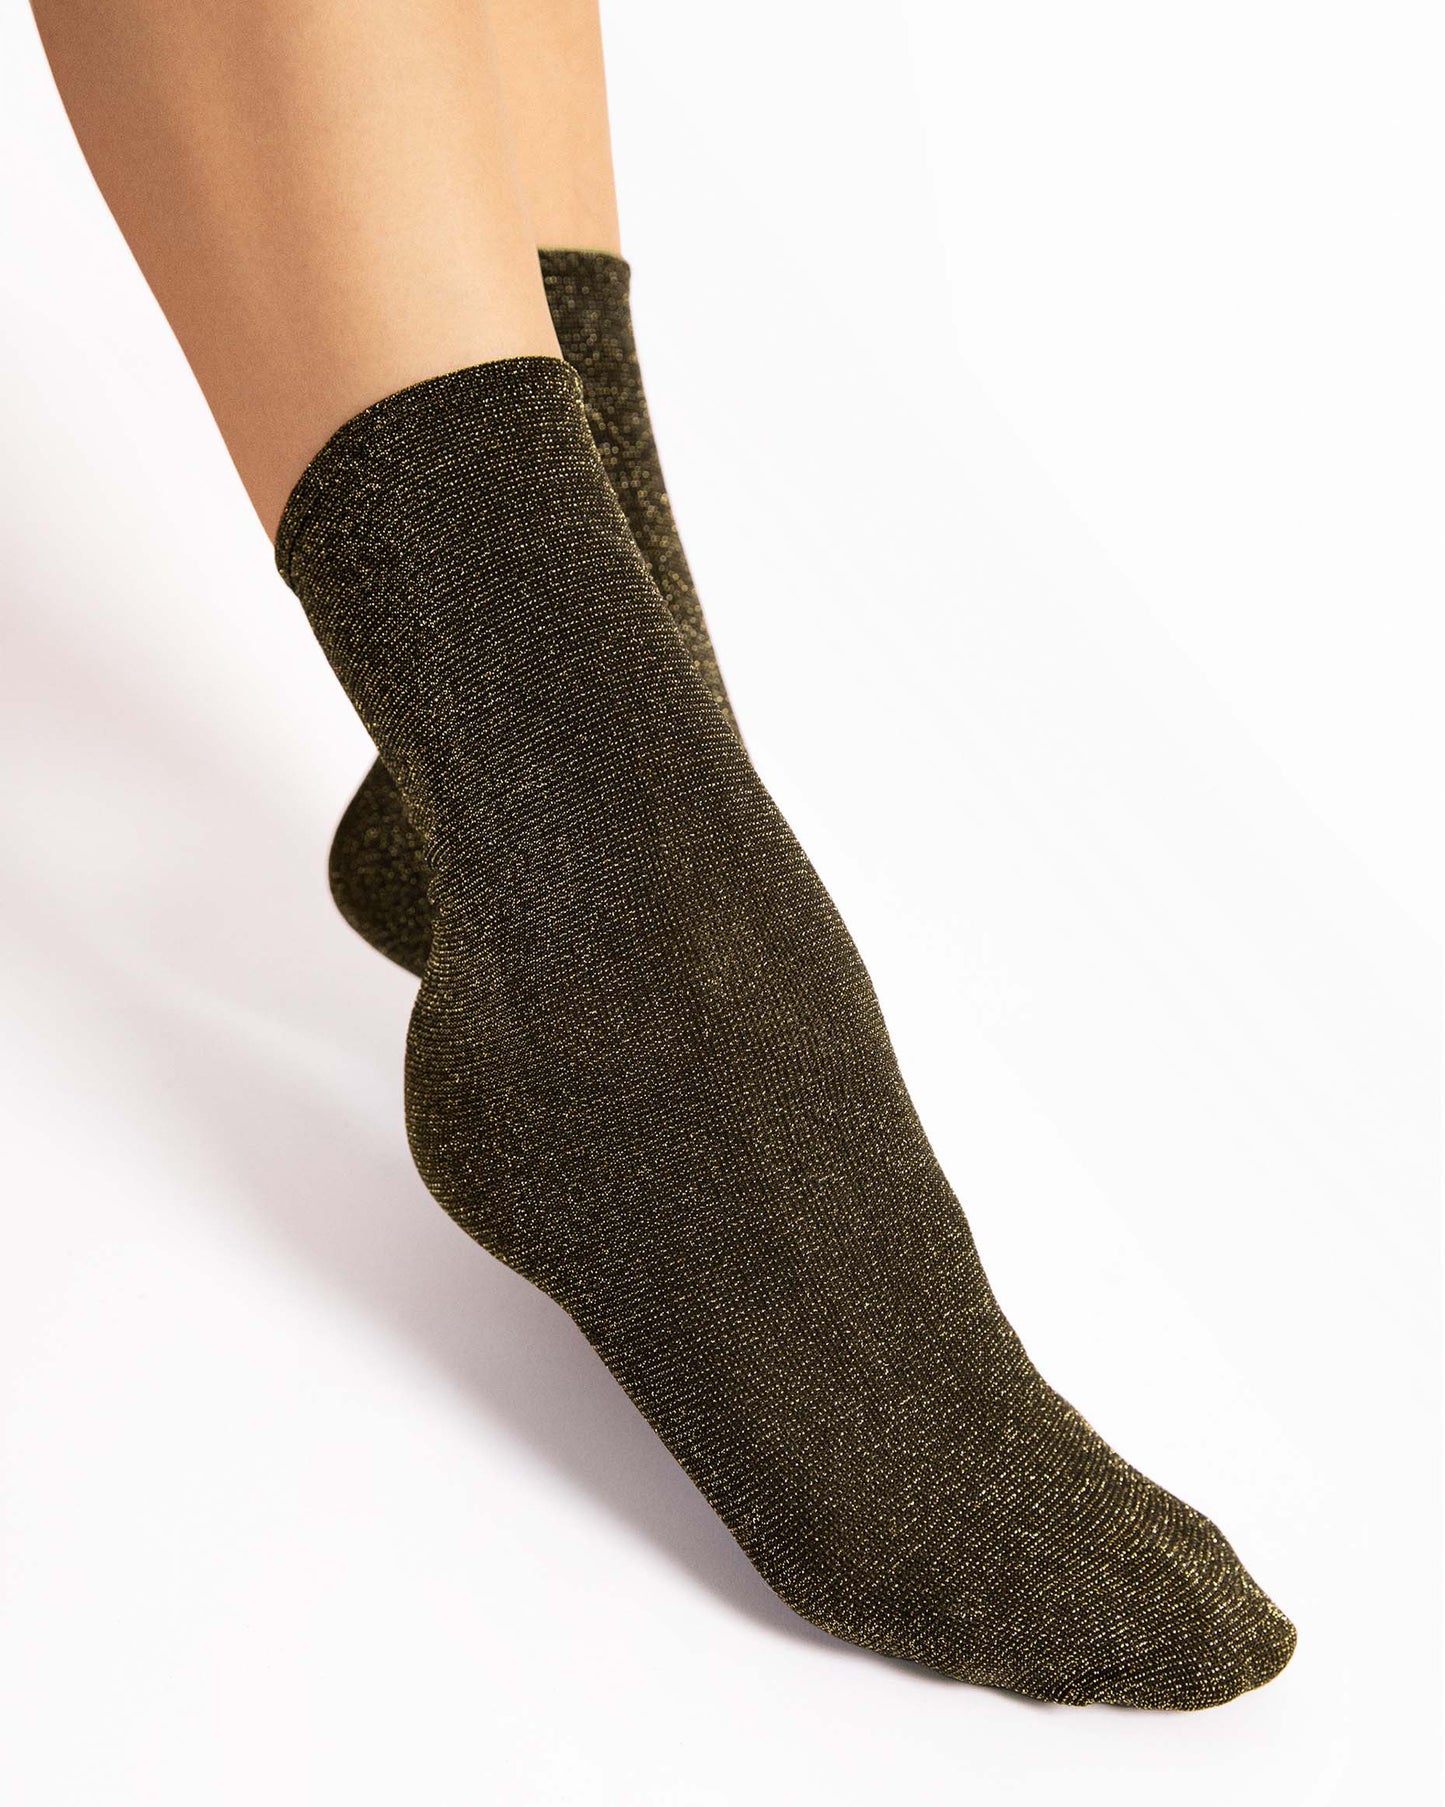 Fiore Bestie Socks - Black opaque tube ankle socks with sparkly gold lurex woven throughout.